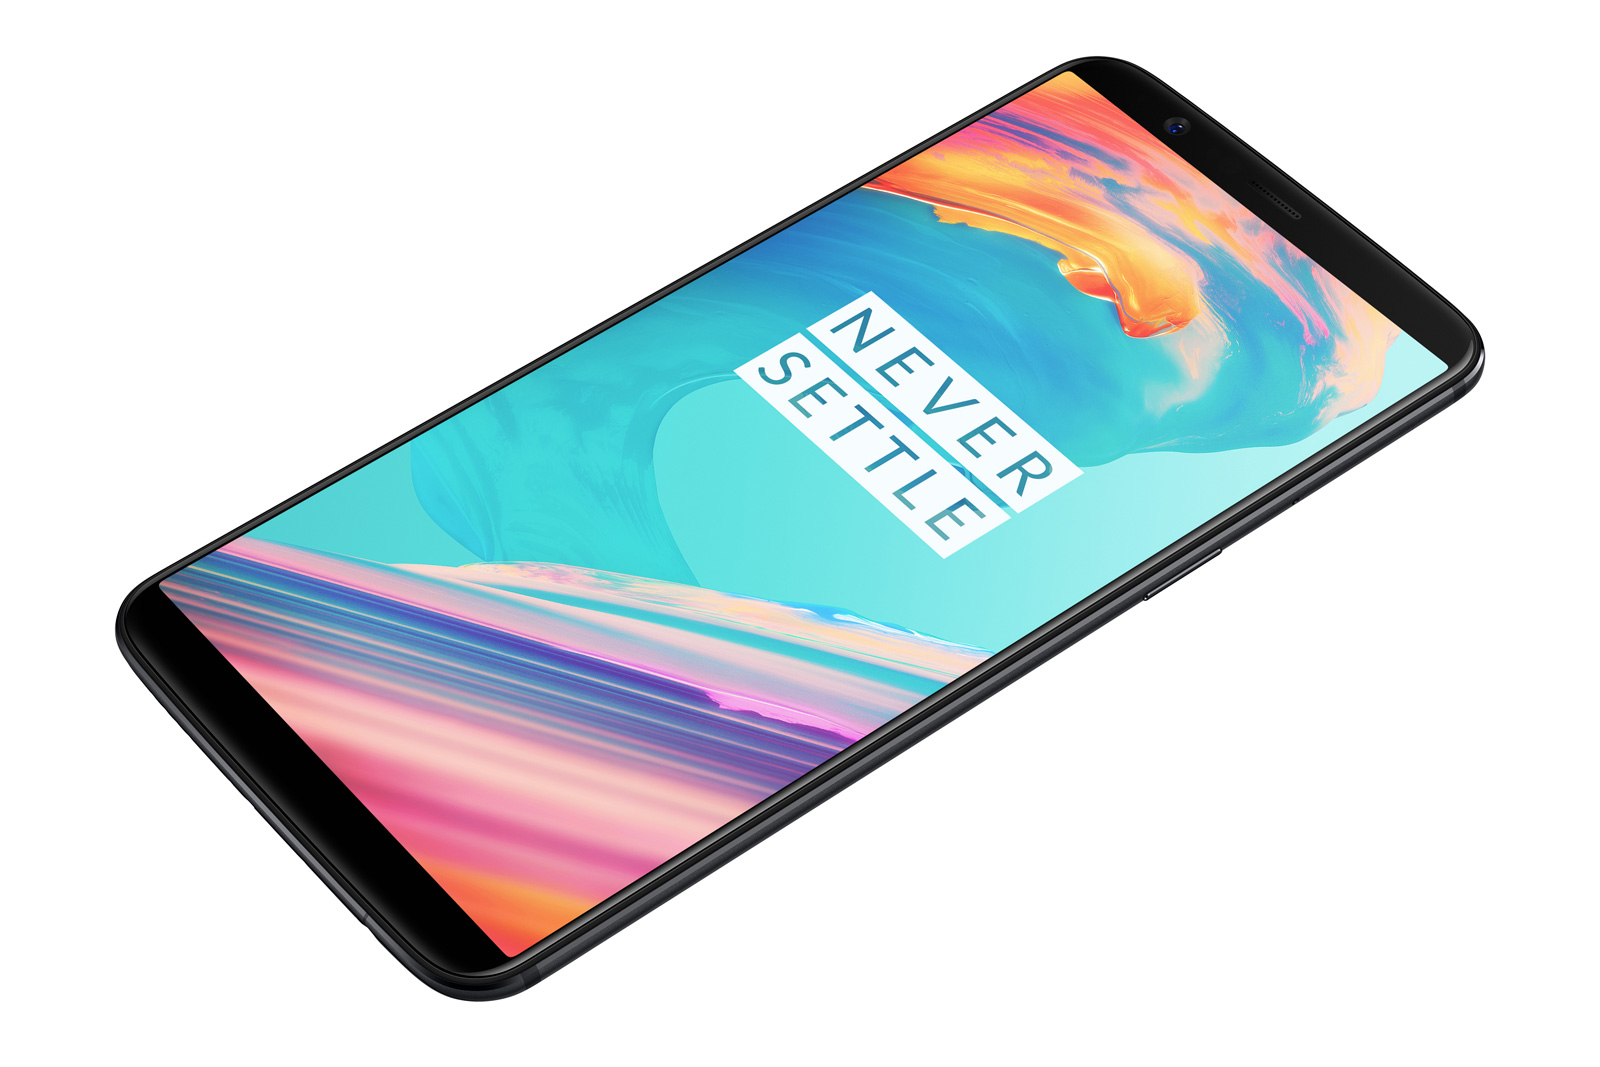 Image result for oneplus 5t screen